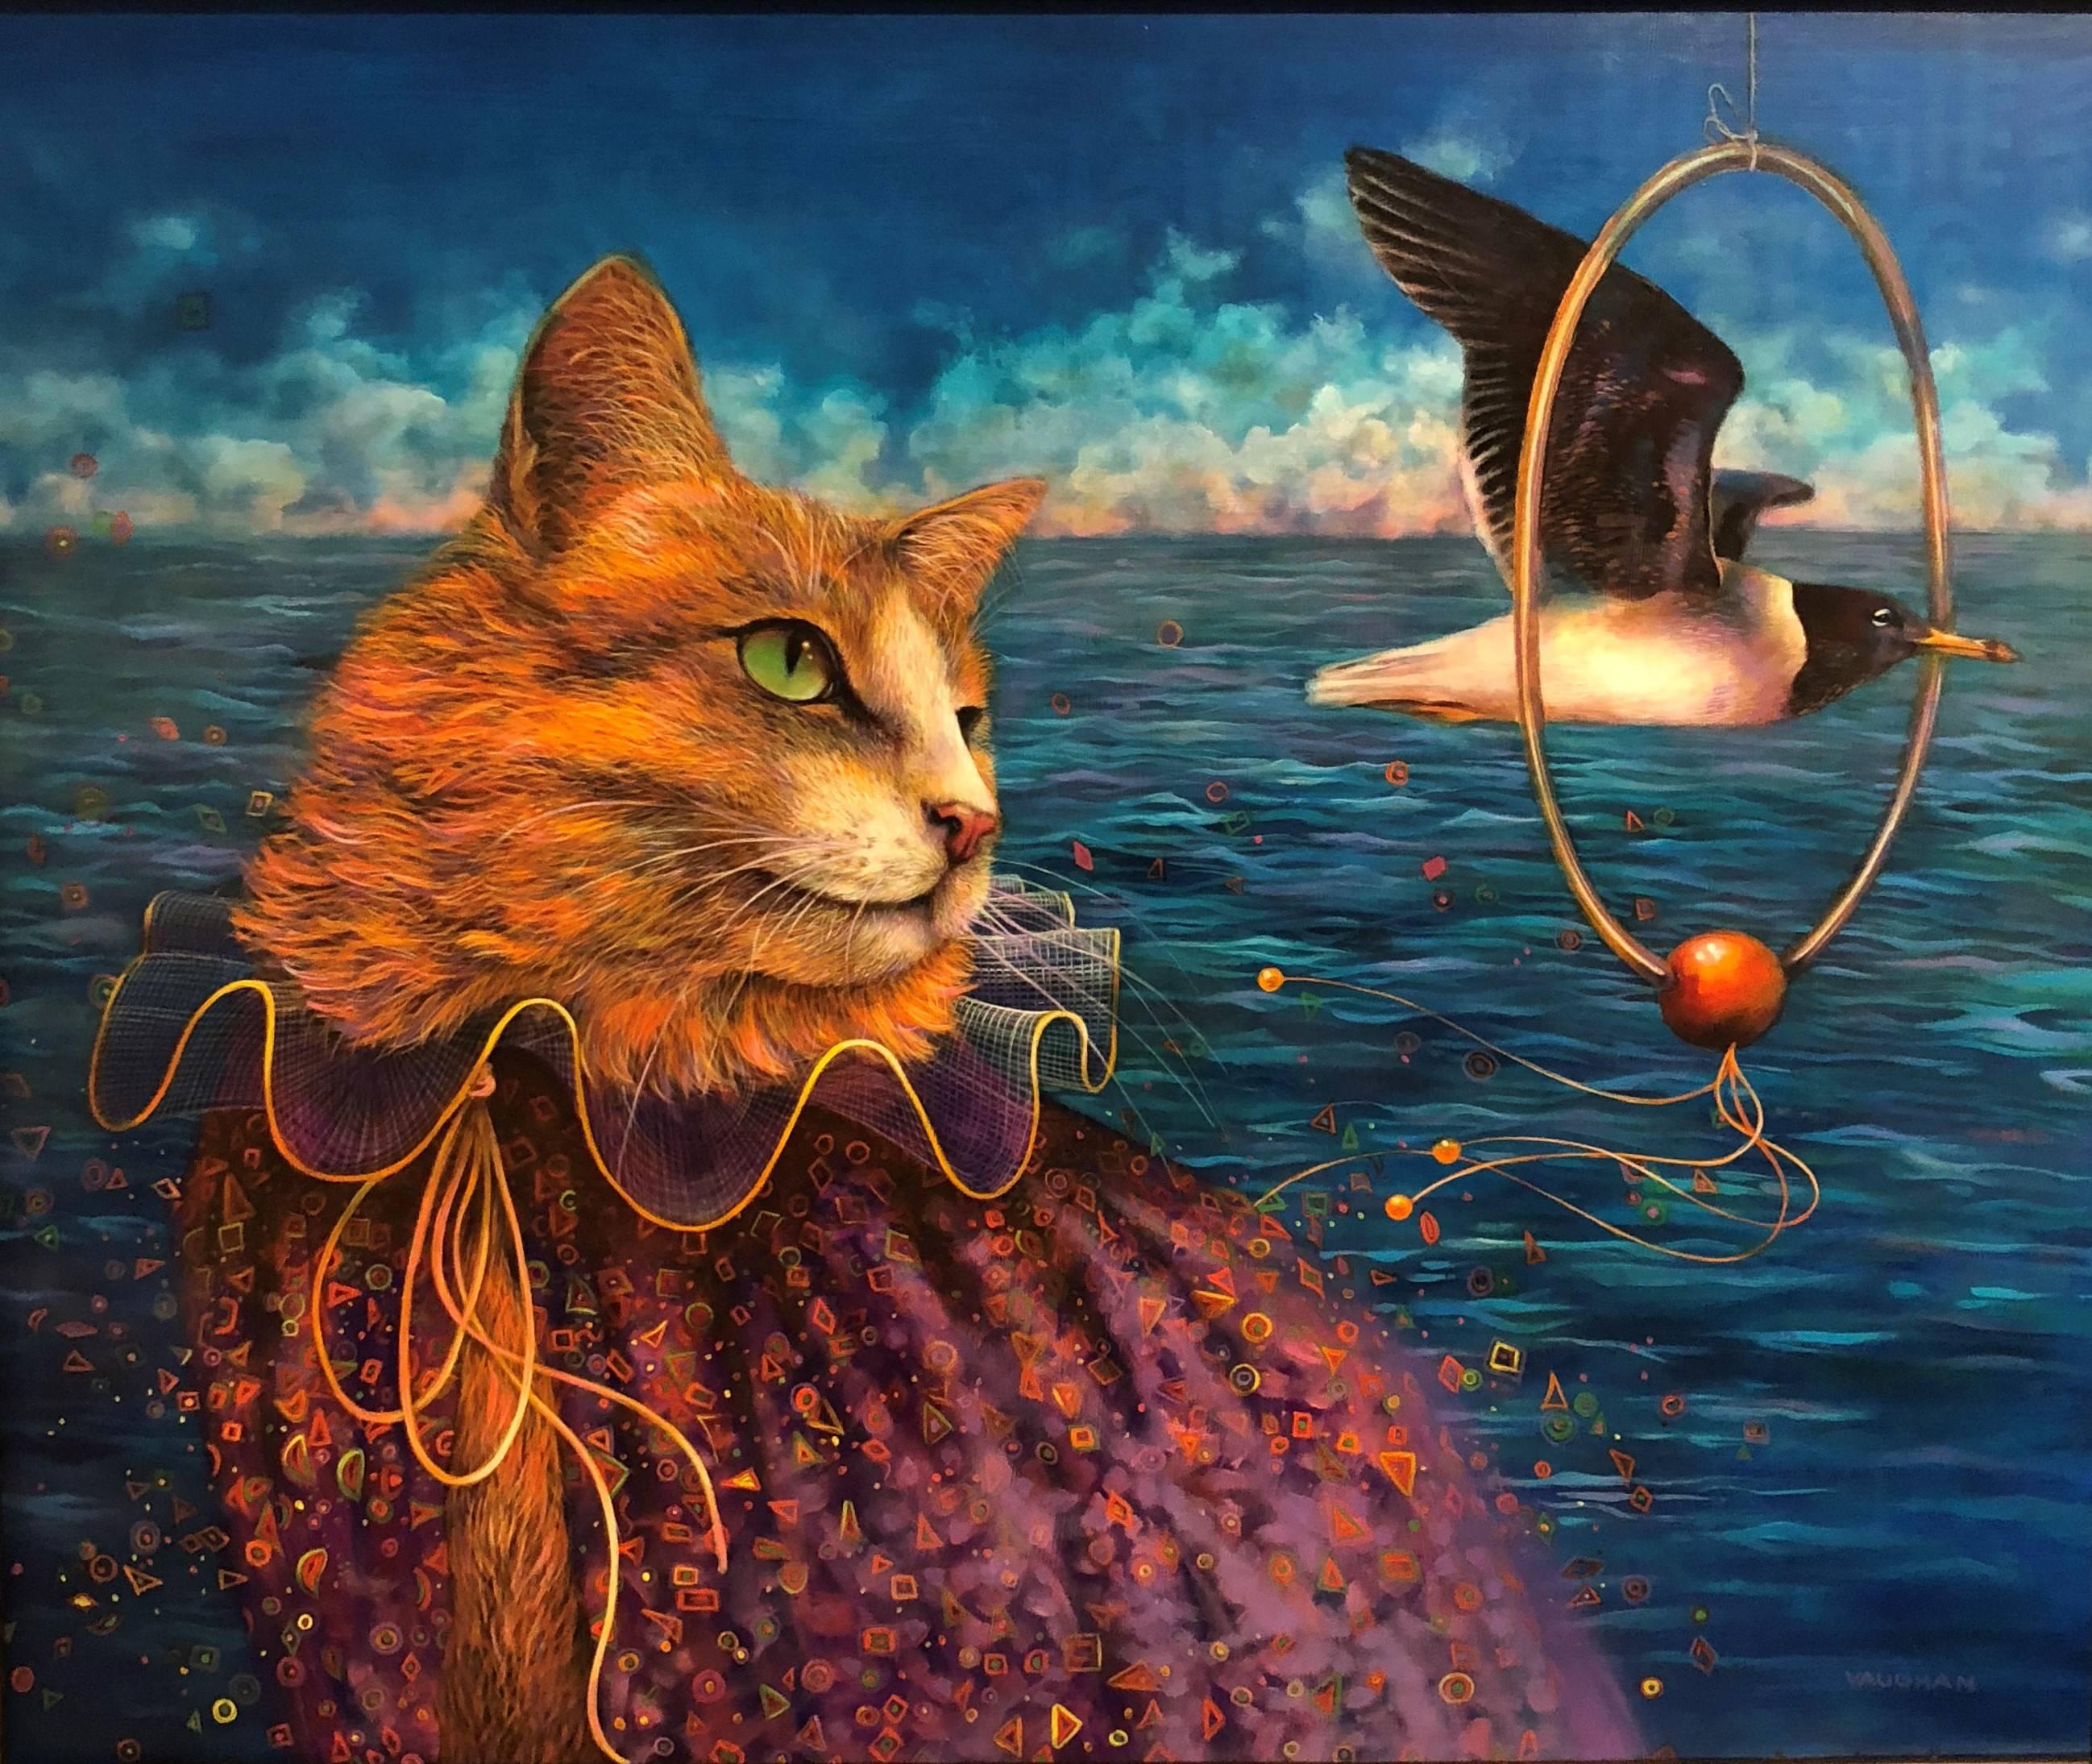 Tricks - Original Oil Painting, Anthropomorphic Scene with Cat and Seagull